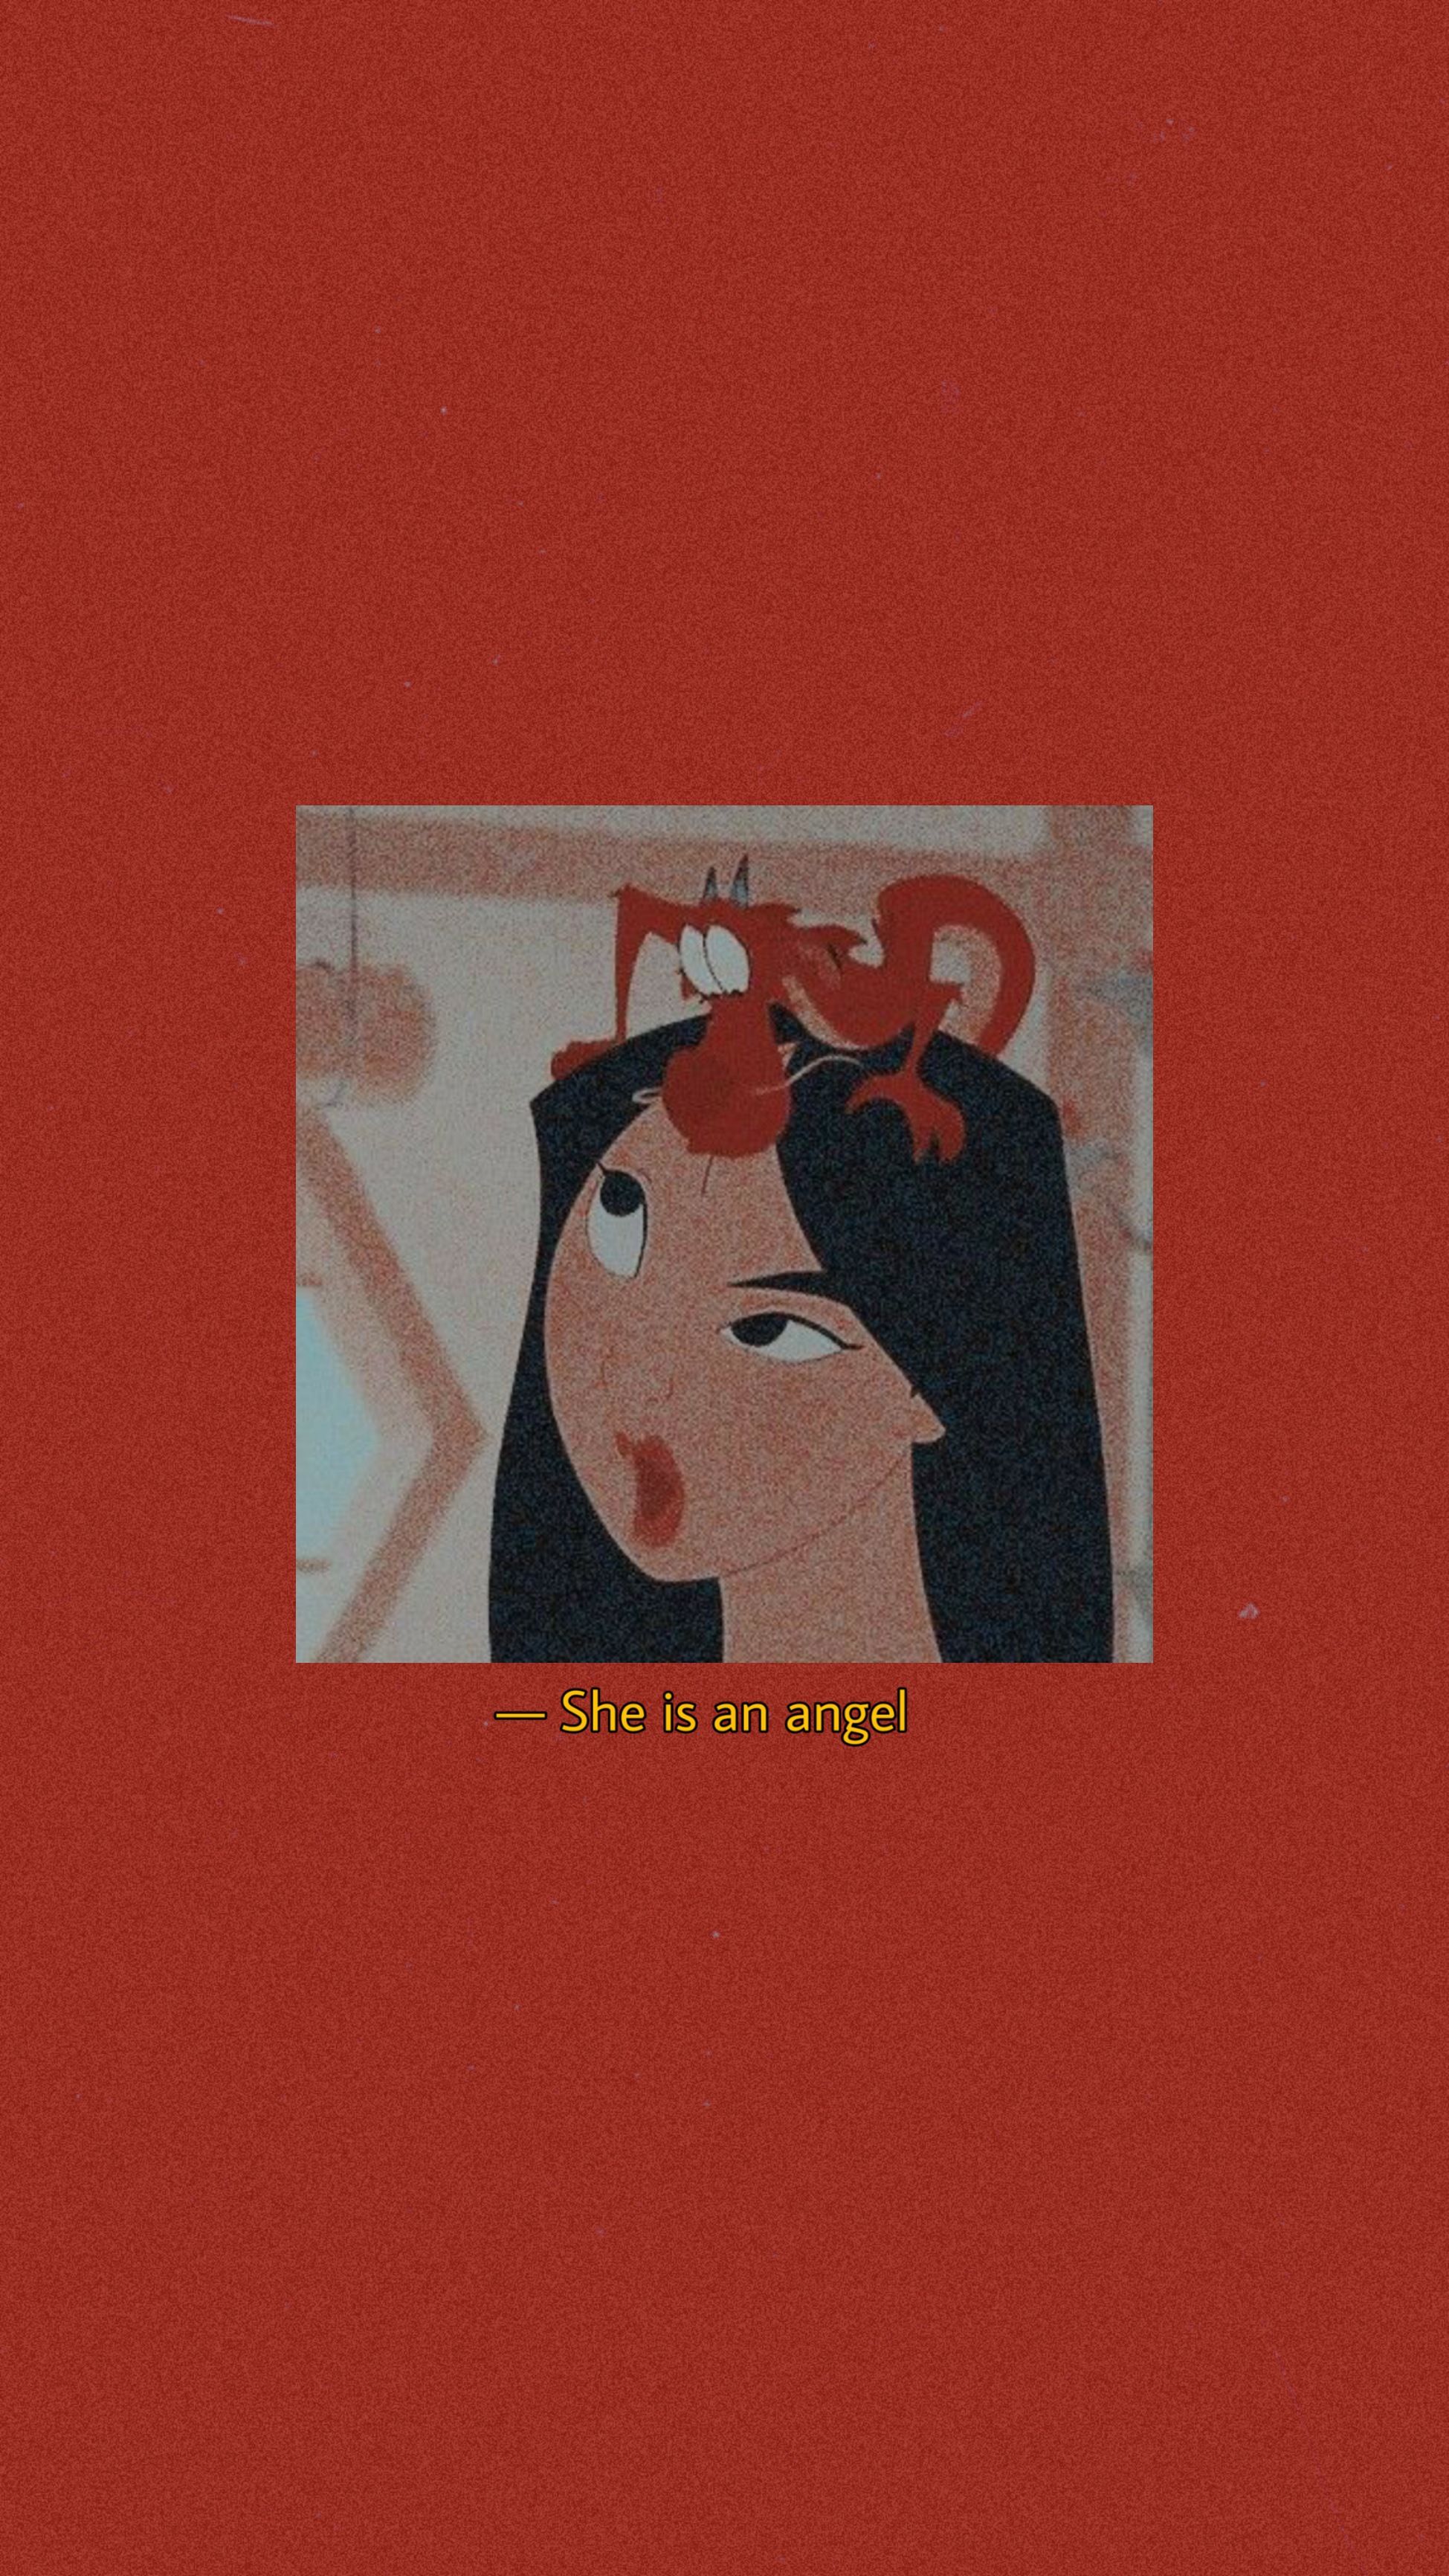 Red aesthetic background with Mulan from Disney's Mulan movie with the quote 